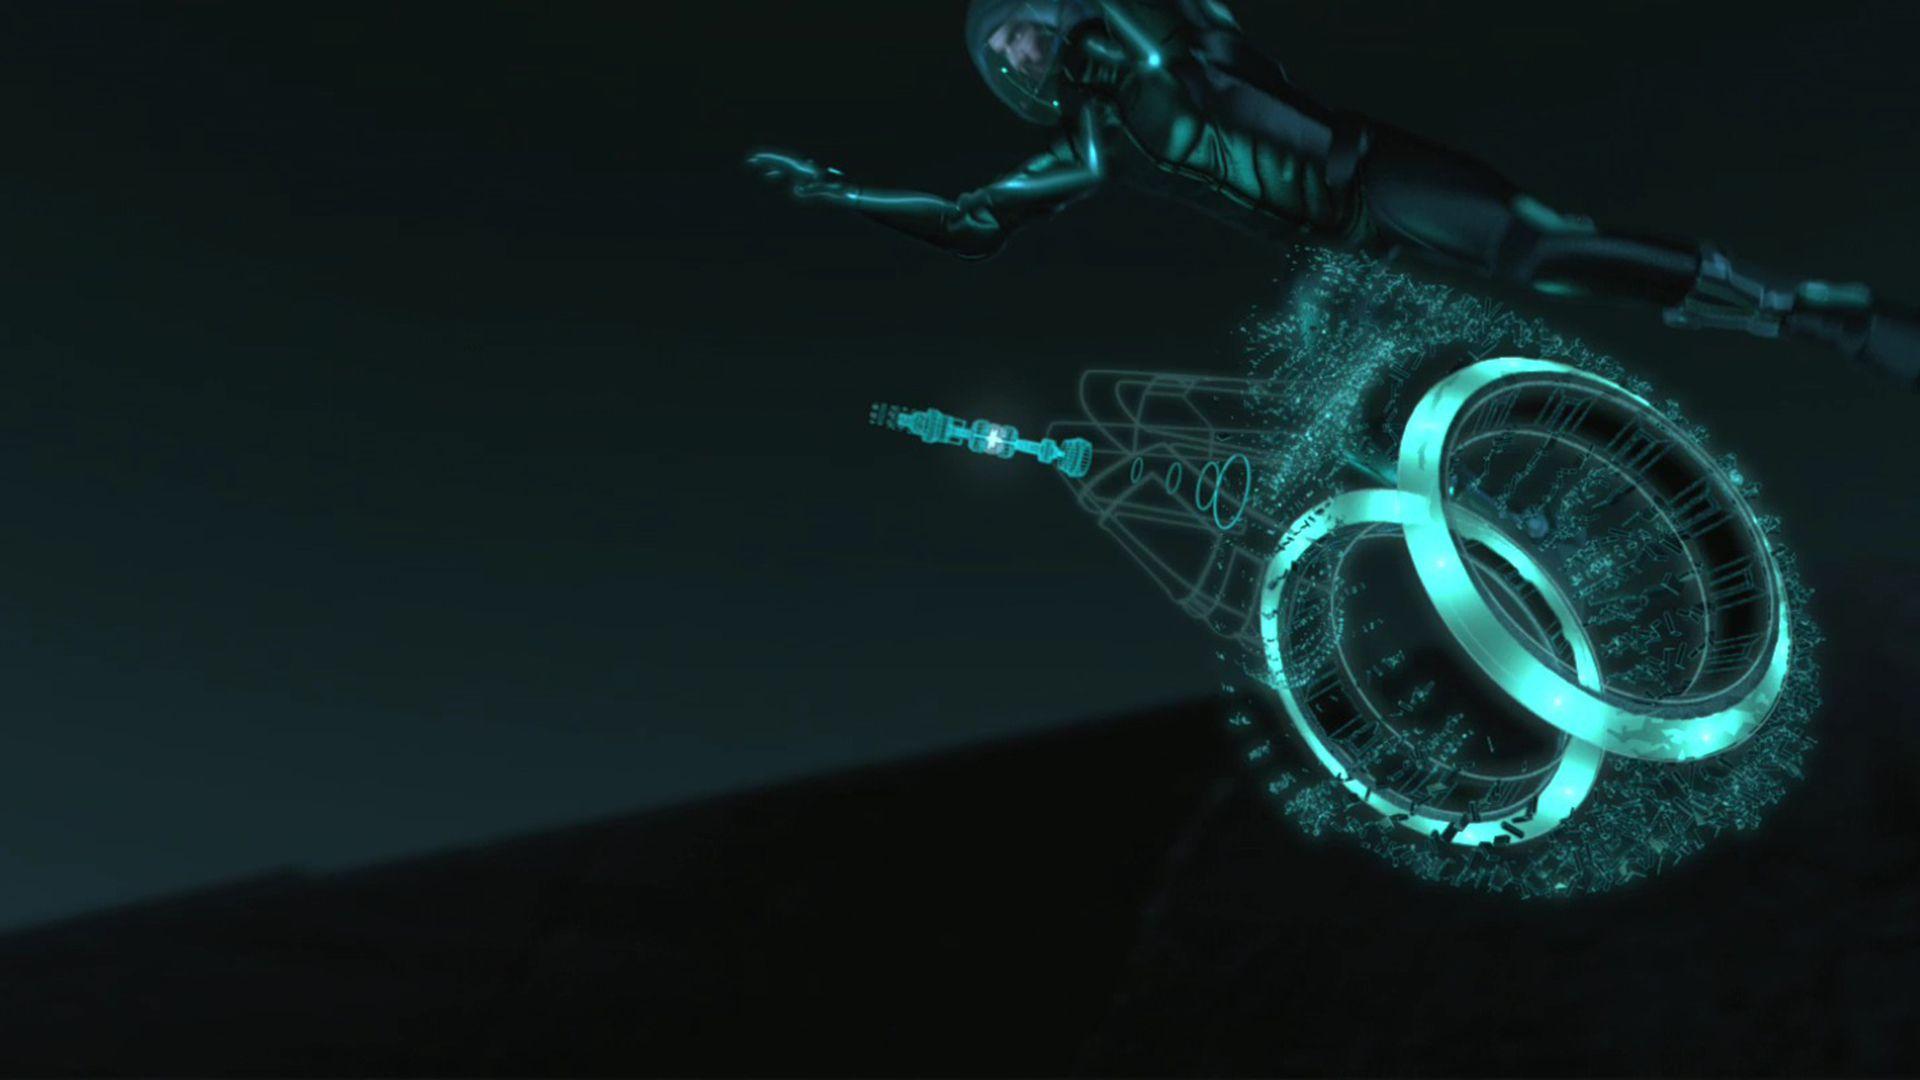 Tron Legacy. Free Desktop Wallpaper for Widescreen, HD and Mobile